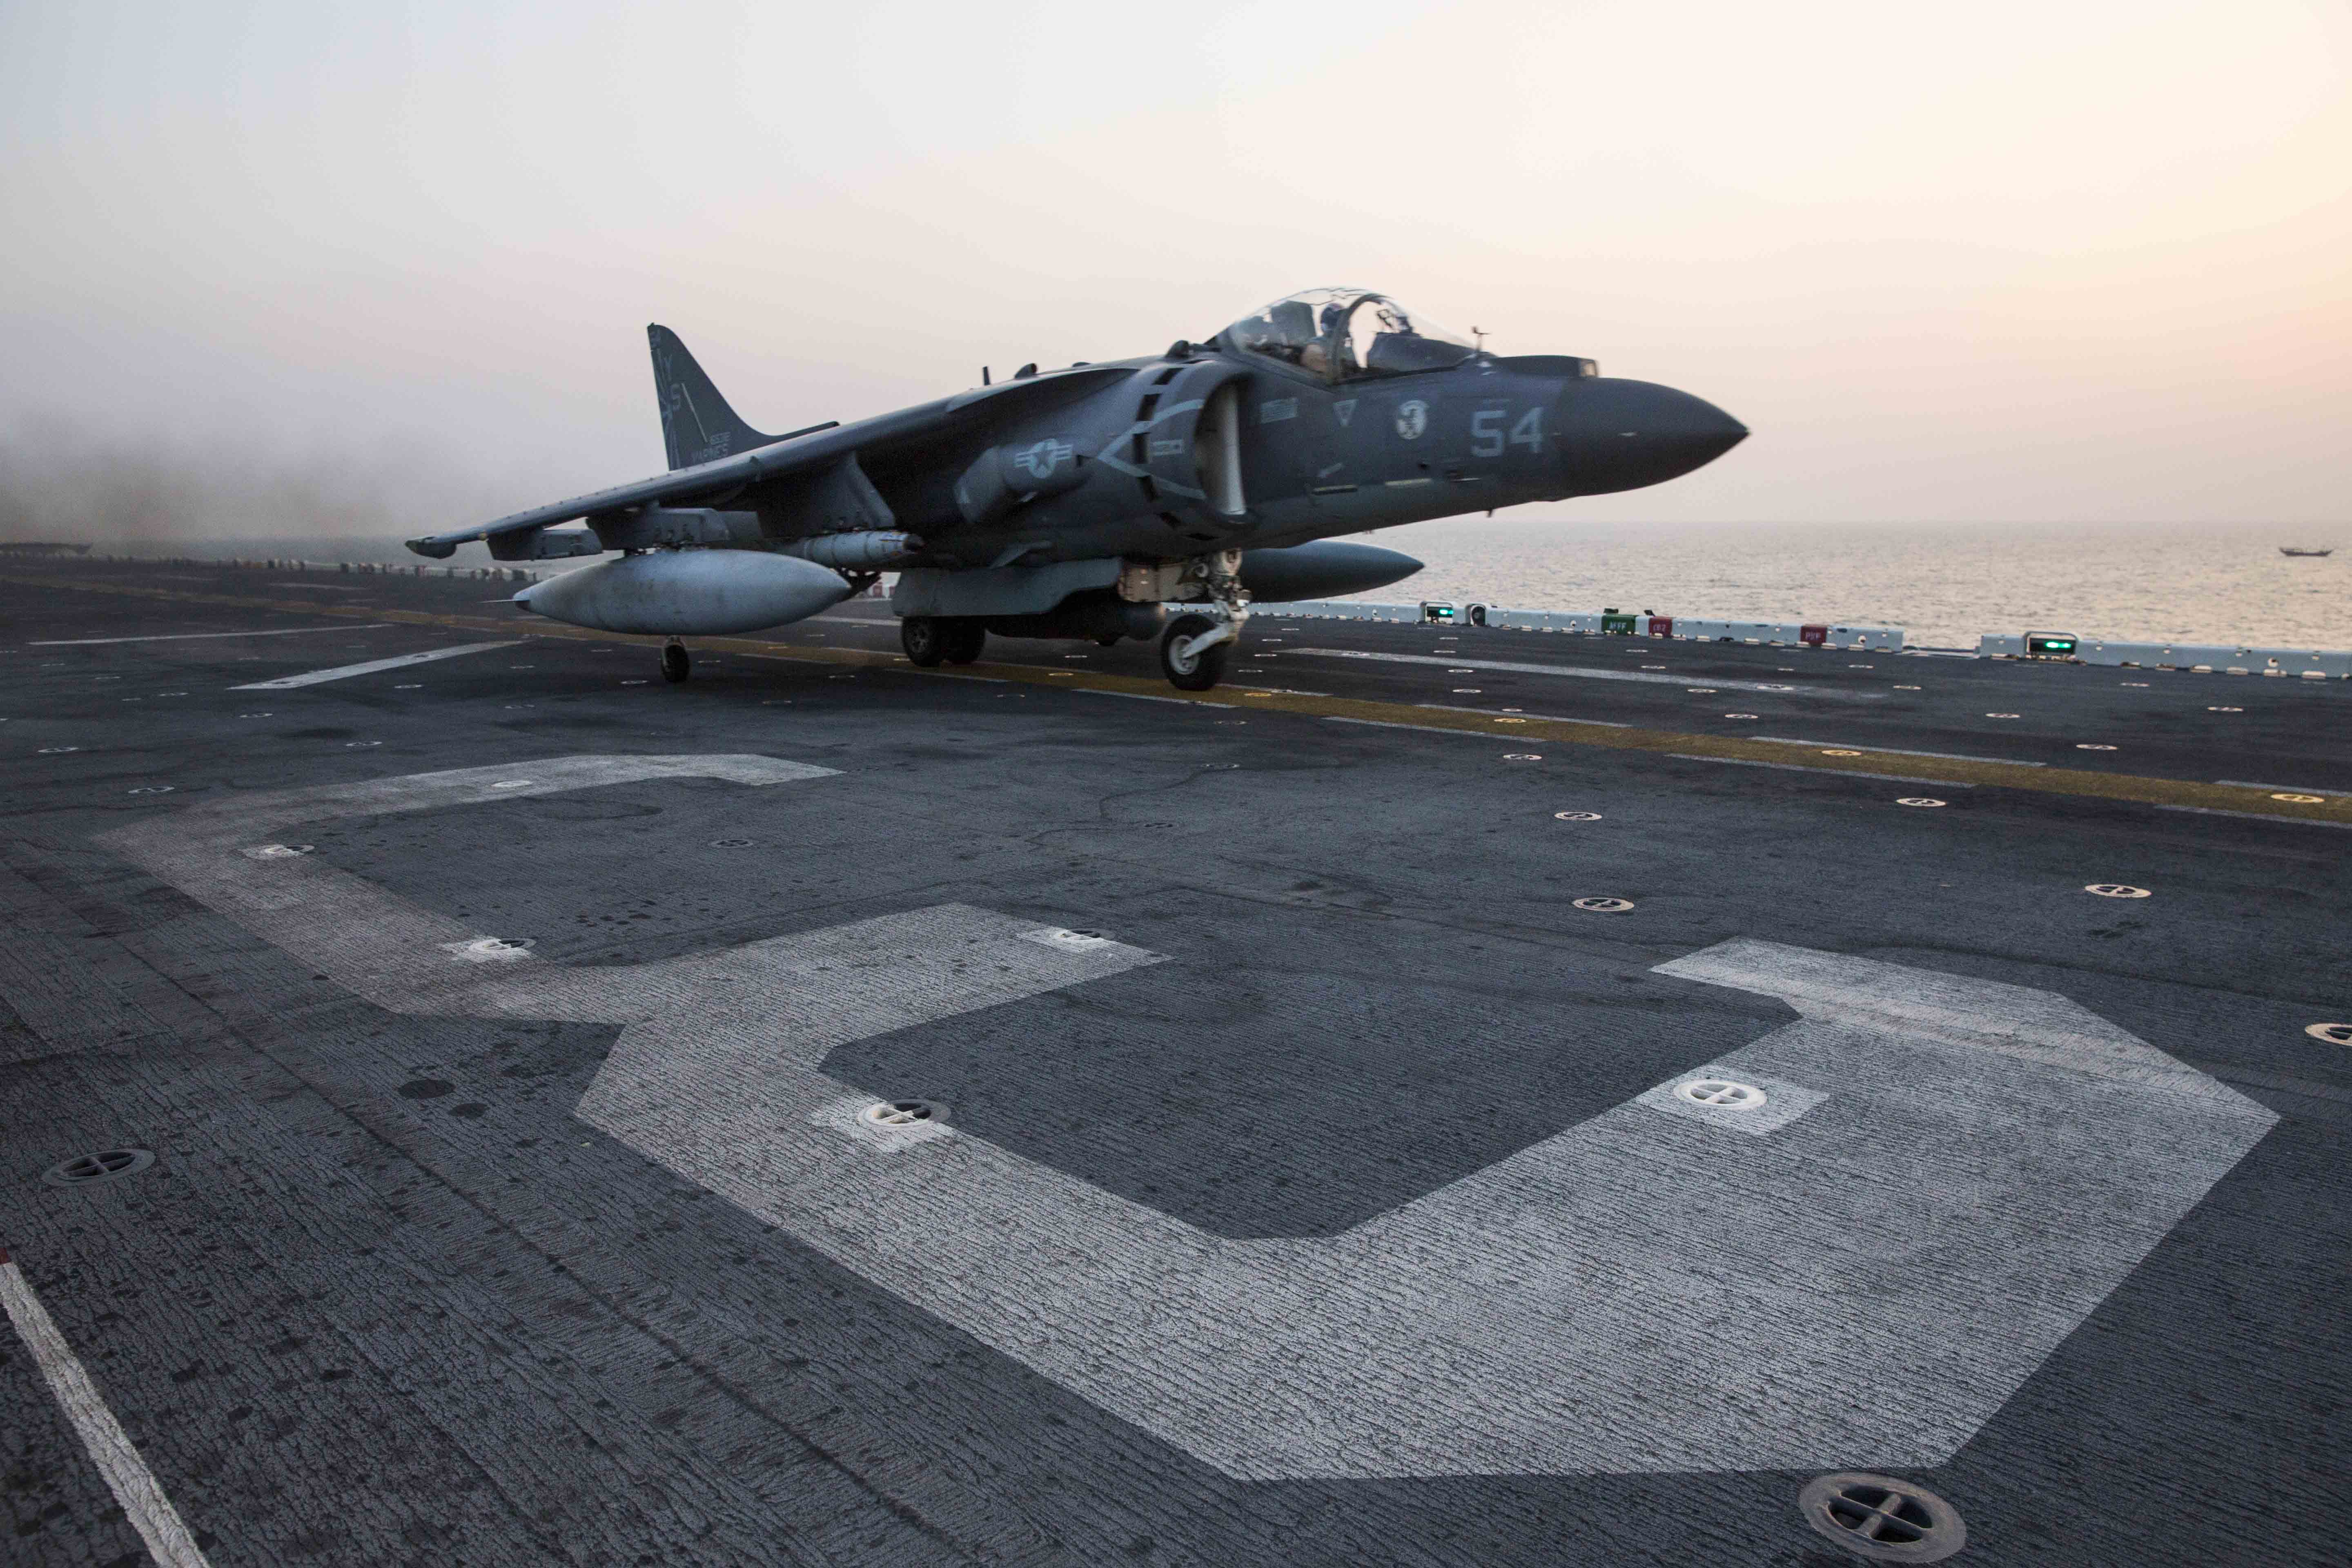 An AV-8B Harrier assigned to Marine Medium Tiltrotor Squadron (VMM) 162 (Reinforced), 26th Marine Expeditionary Unit (26th MEU), launches from the amphibious assault ship USS Kearsarge (LHD-3) on Nov. 19, 2015. US Navy Photo